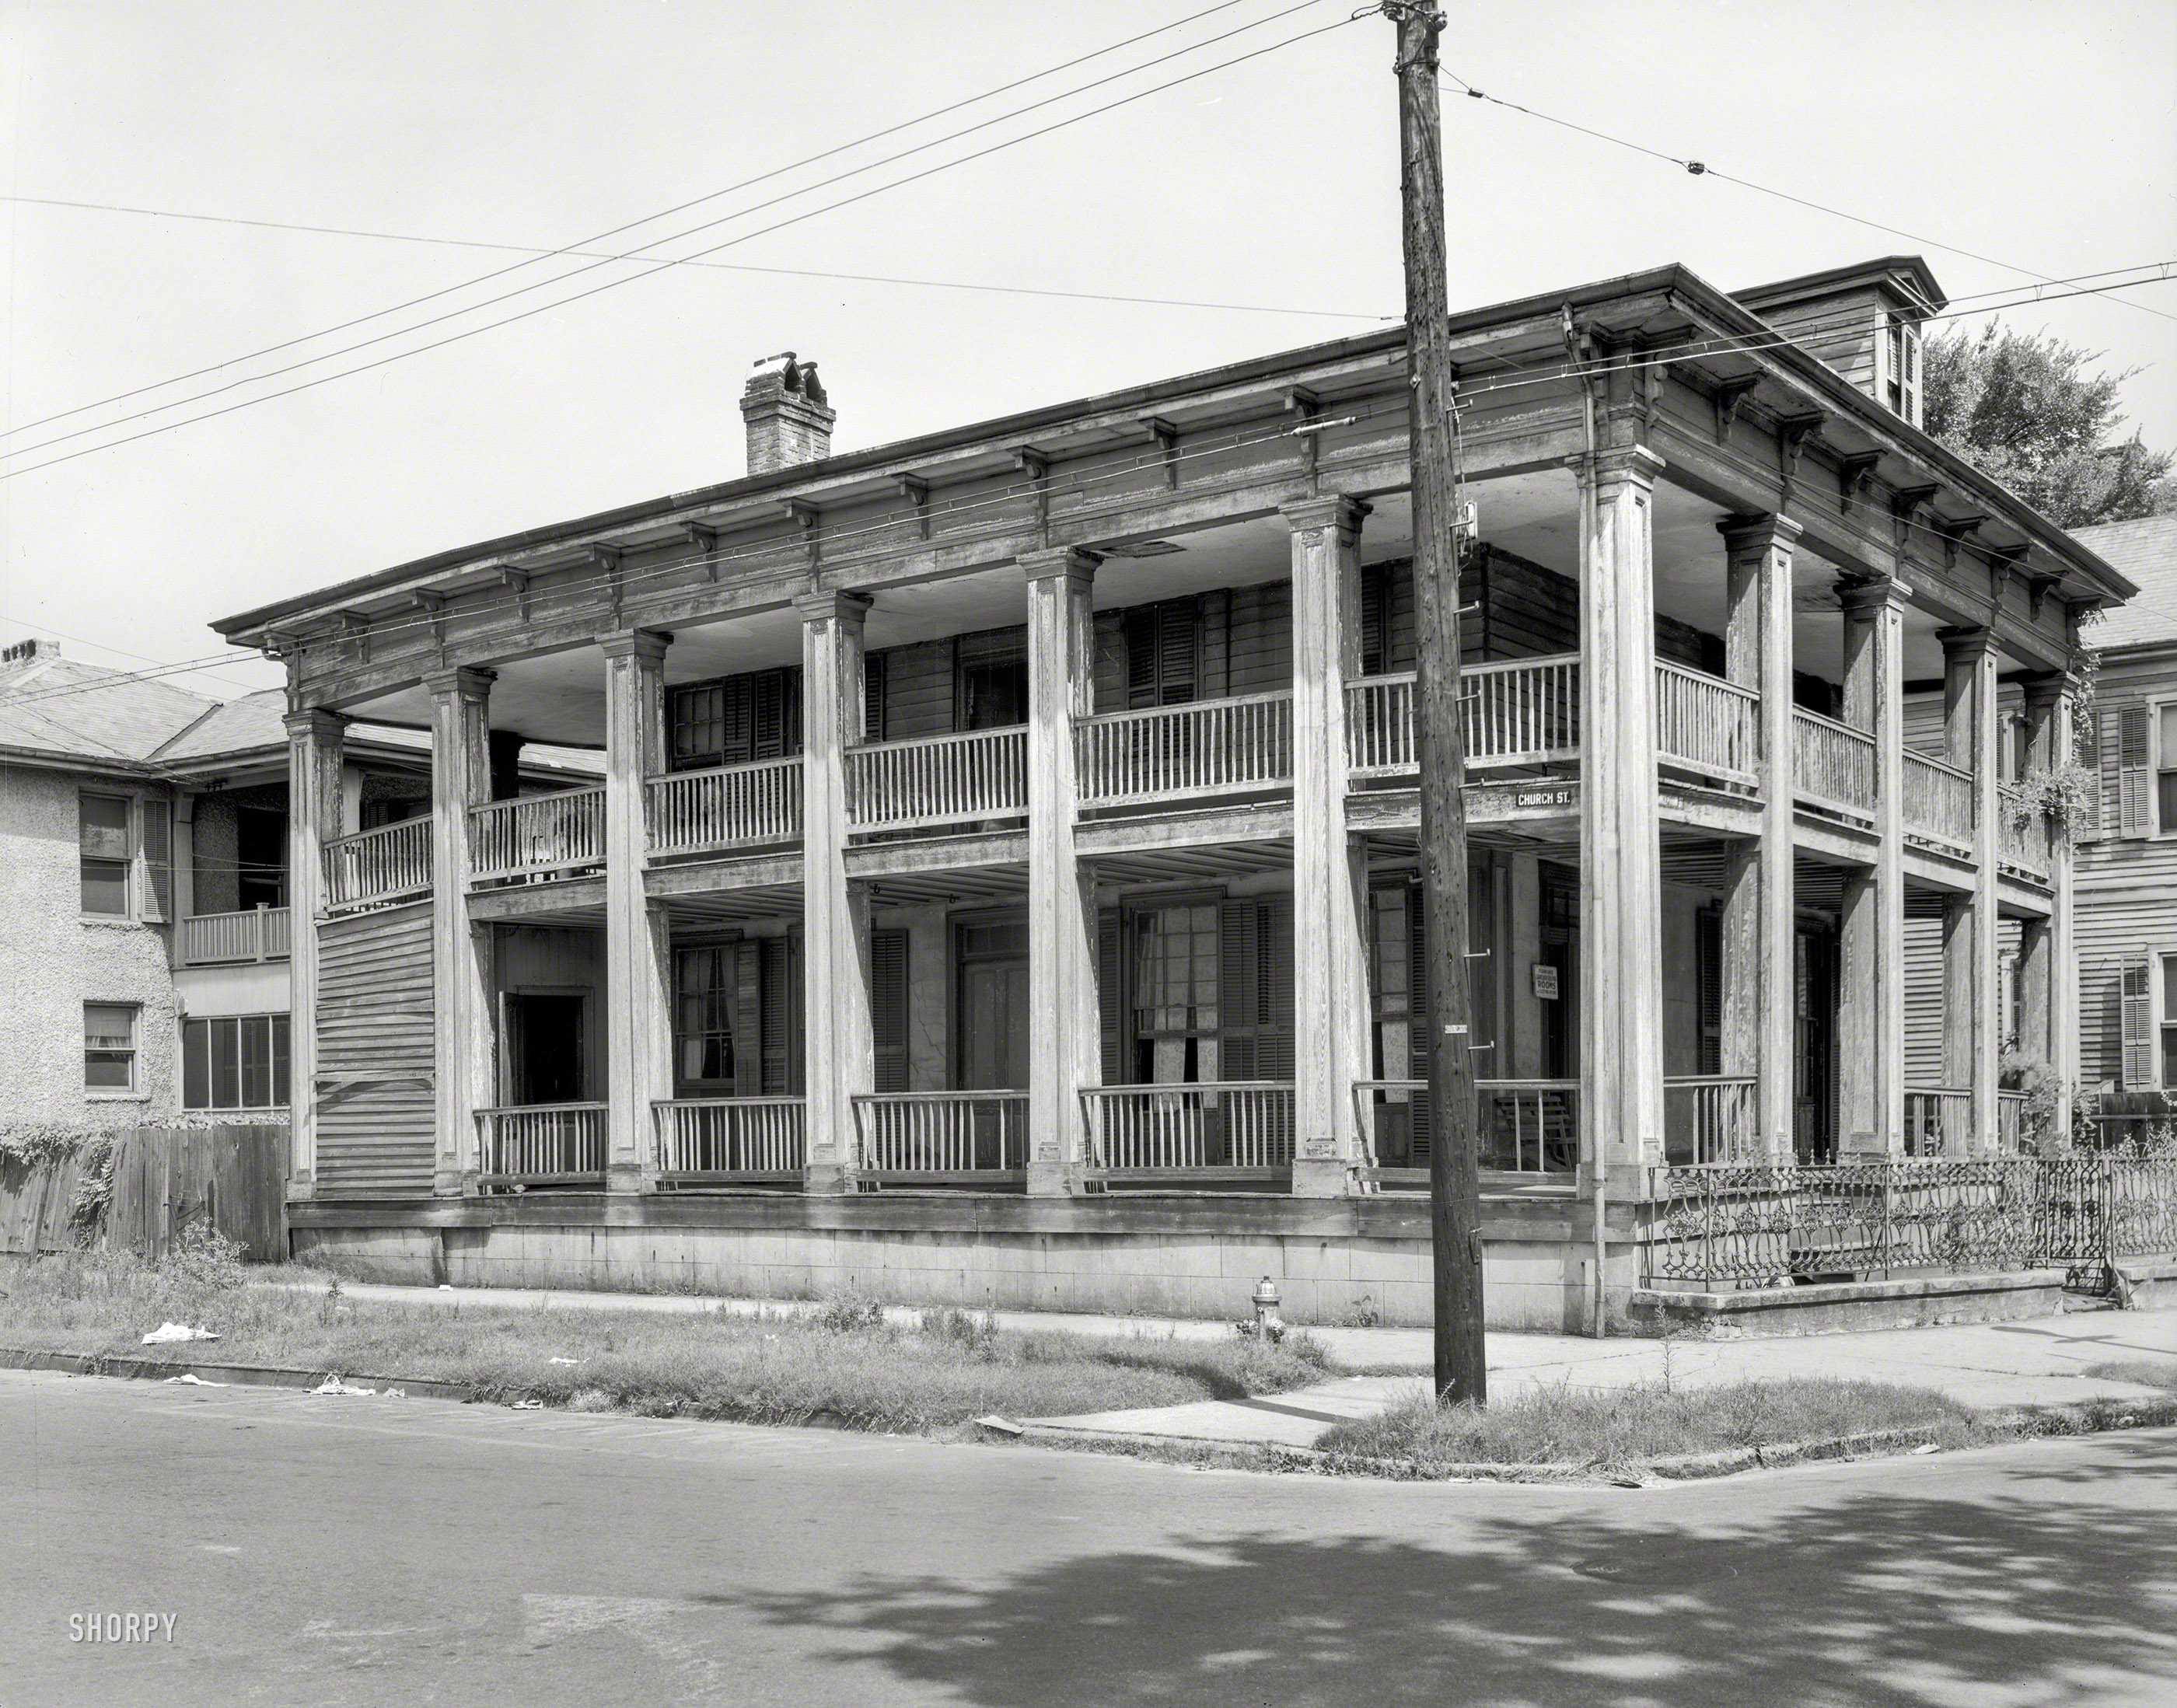 1939. "Forsyth House, 112 S. Conception Street, Mobile, Alabama." The sign: "FURNISHED LIGHT HOUSEKEEPING ROOMS and SLEEPING ROOMS." 8x10 inch acetate negative by Frances Benjamin Johnston. View full size.